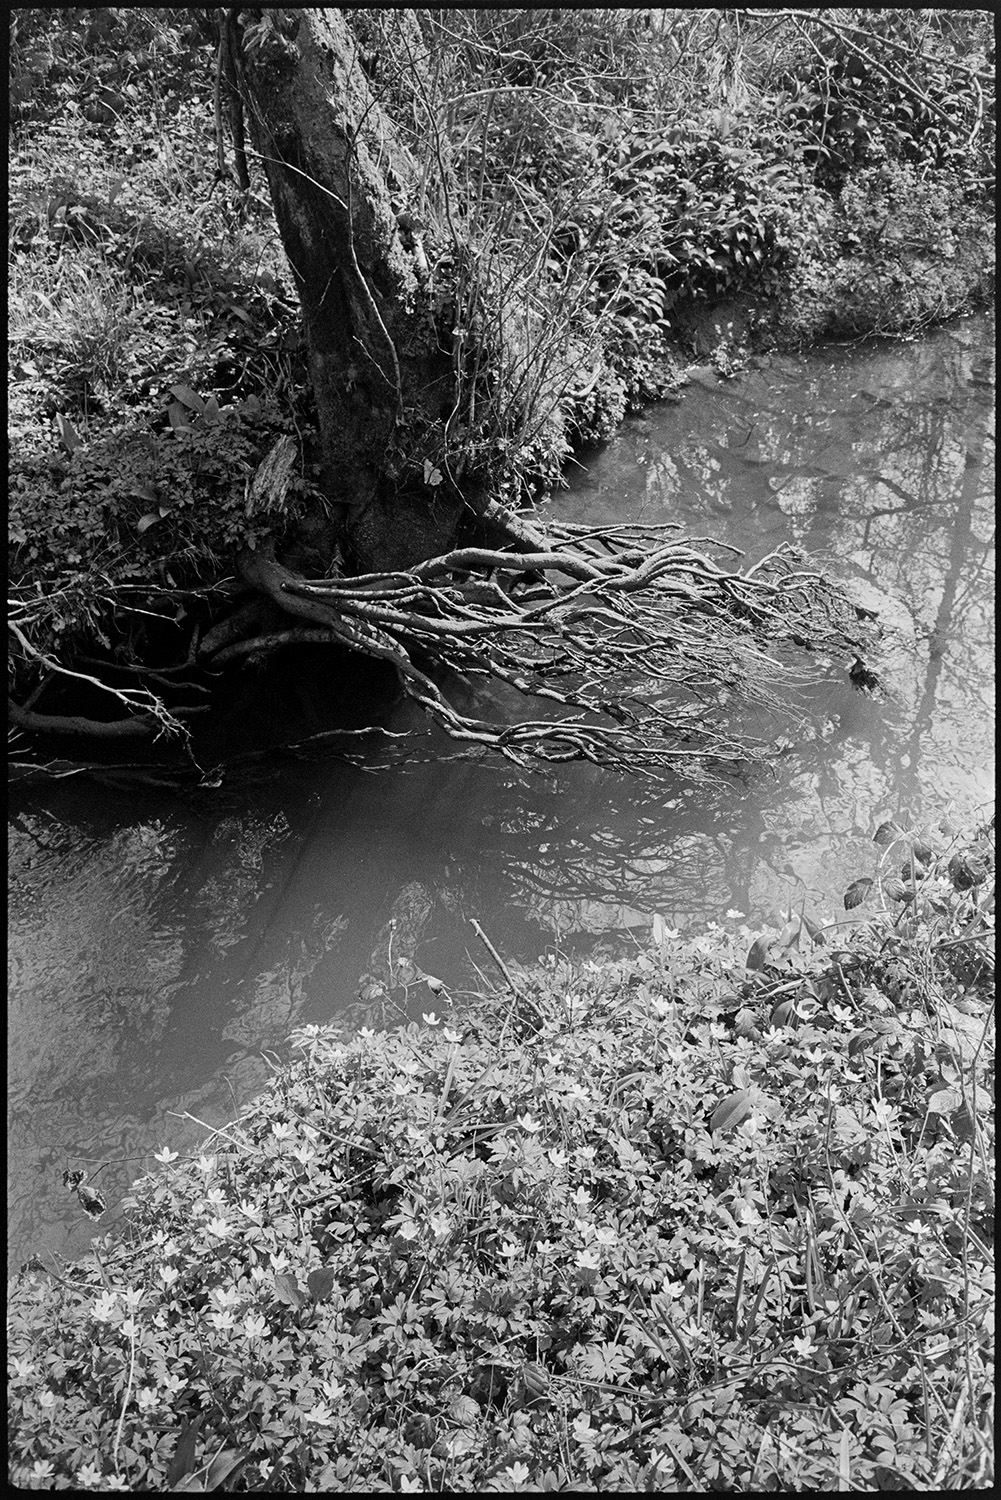 Flowers and leaves beside stream. 
[Tree roots and foliage overhanging a stream near Addisford, Dolton. A tree is also growing at the edge of the stream.]